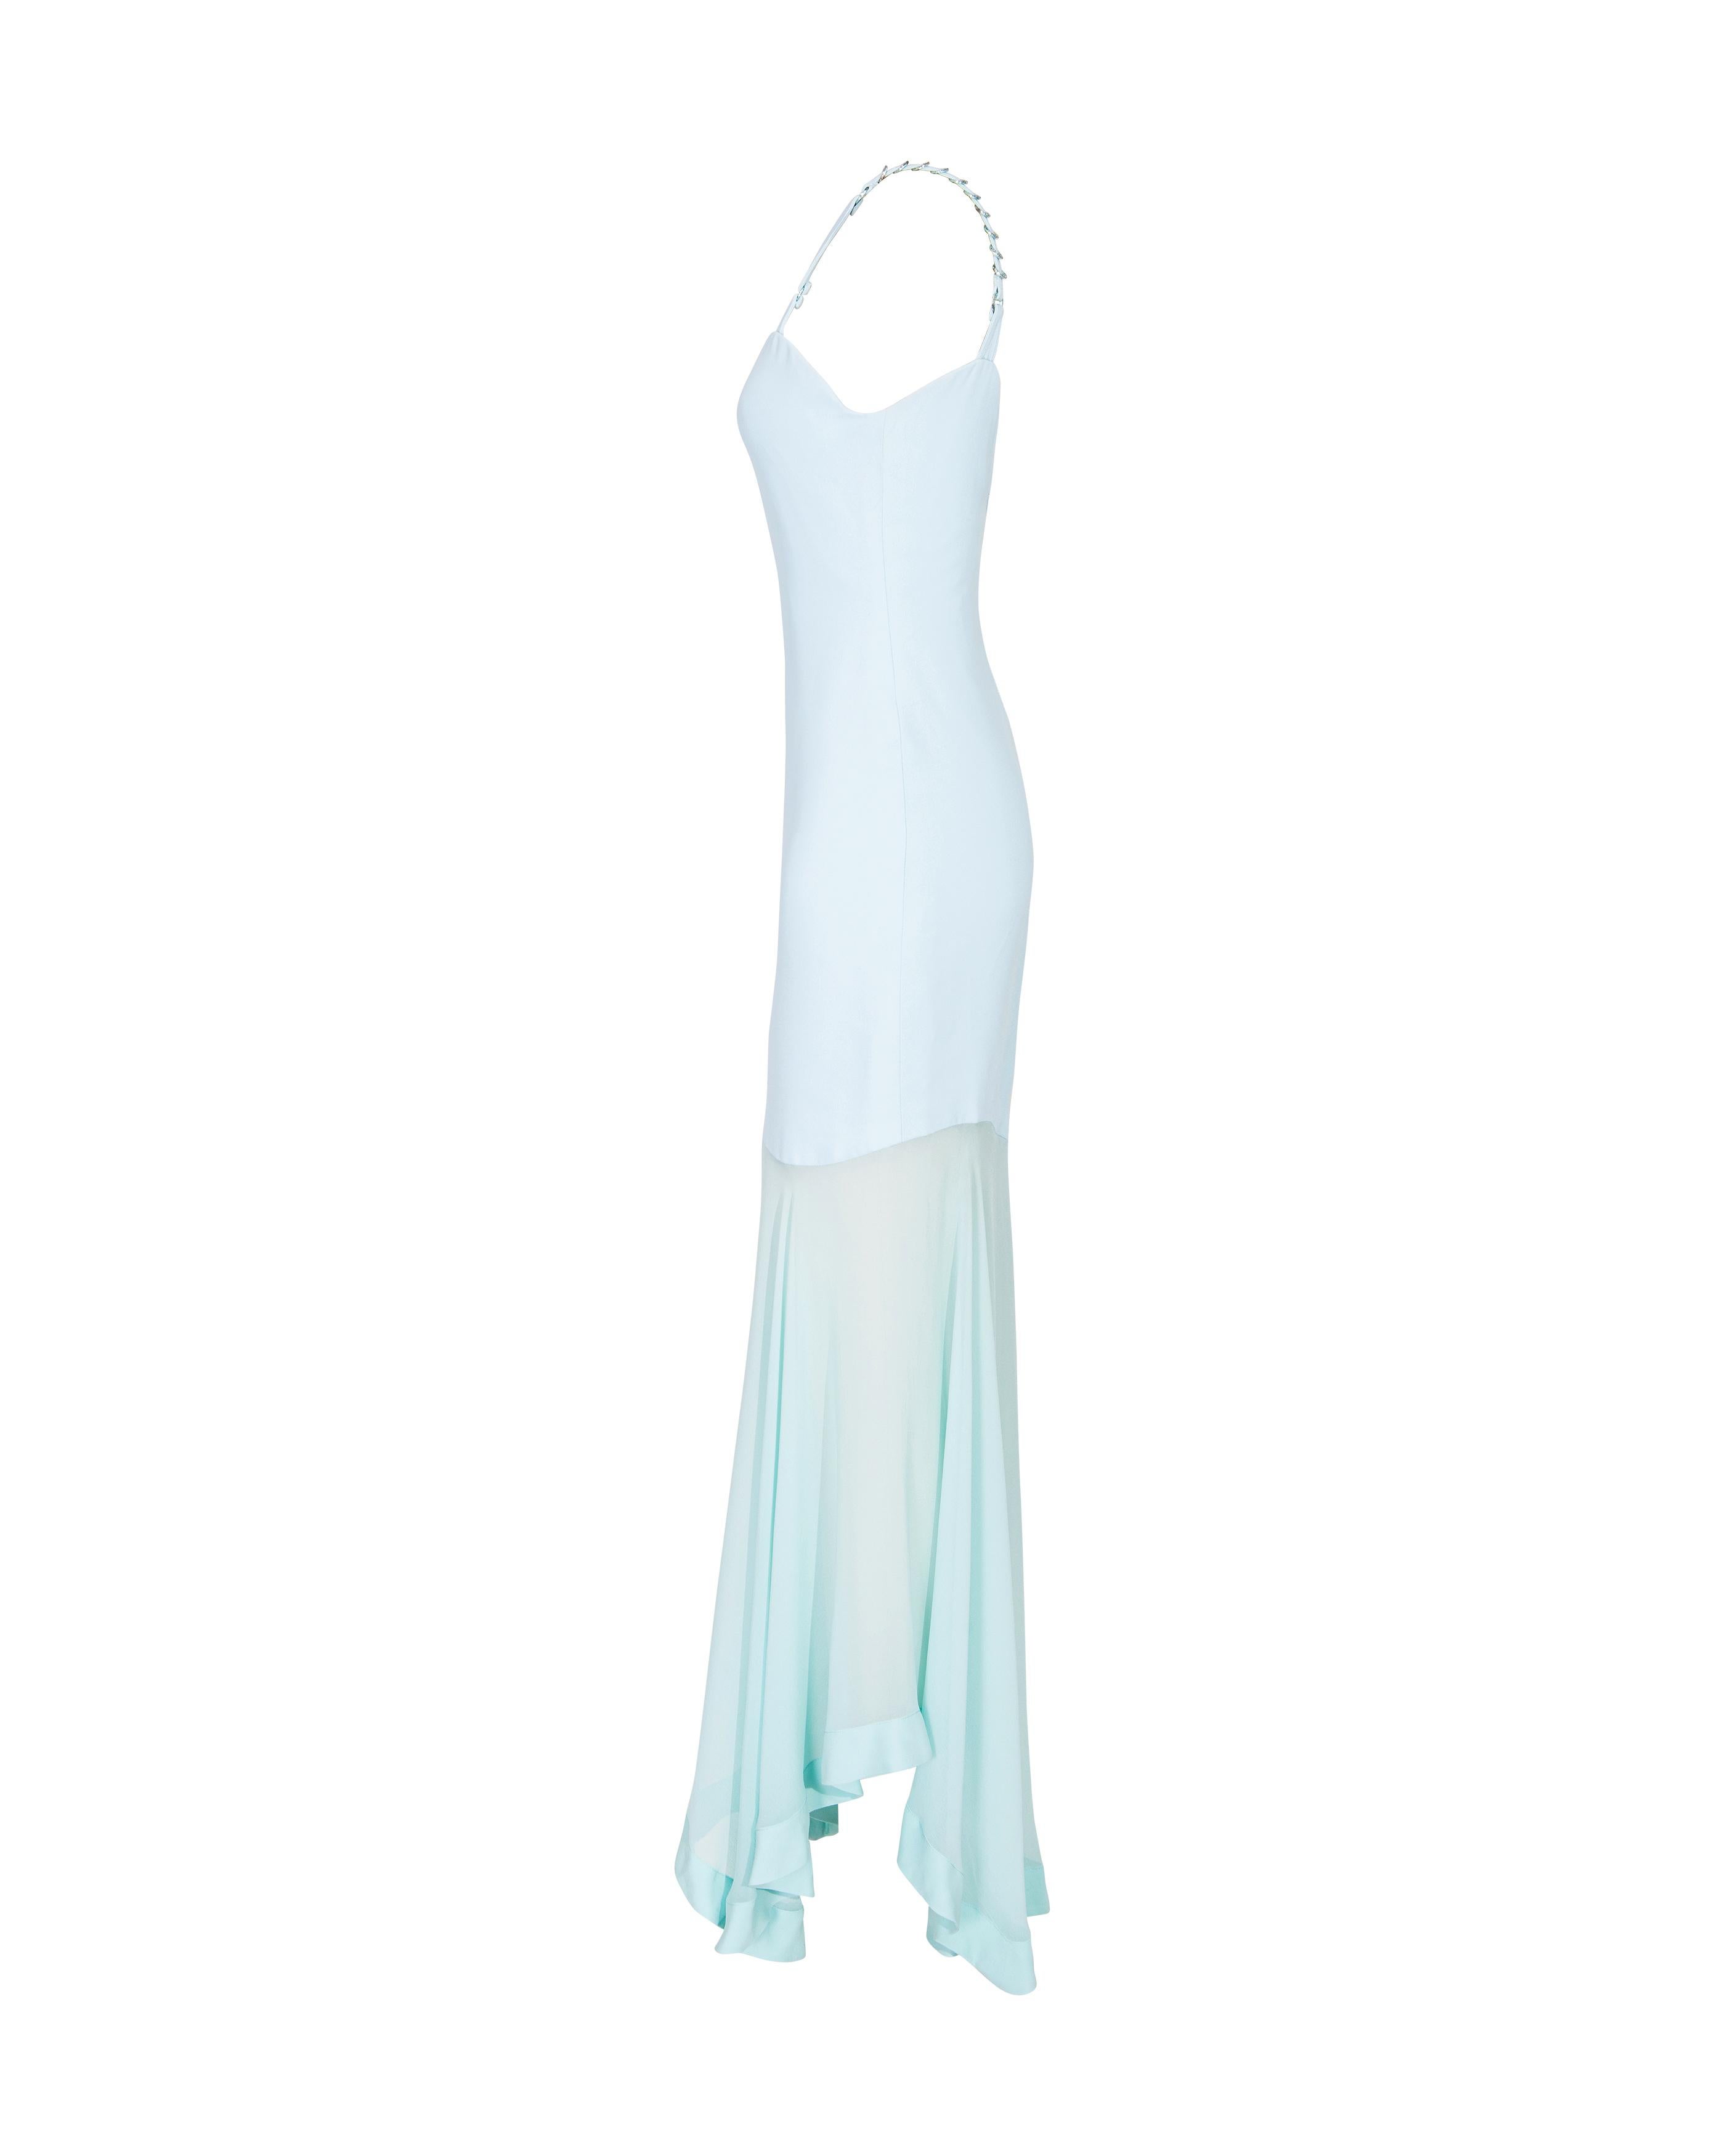 Women's S/S 1995 Gianni Versace Couture Sky Blue Bustier Gown For Sale